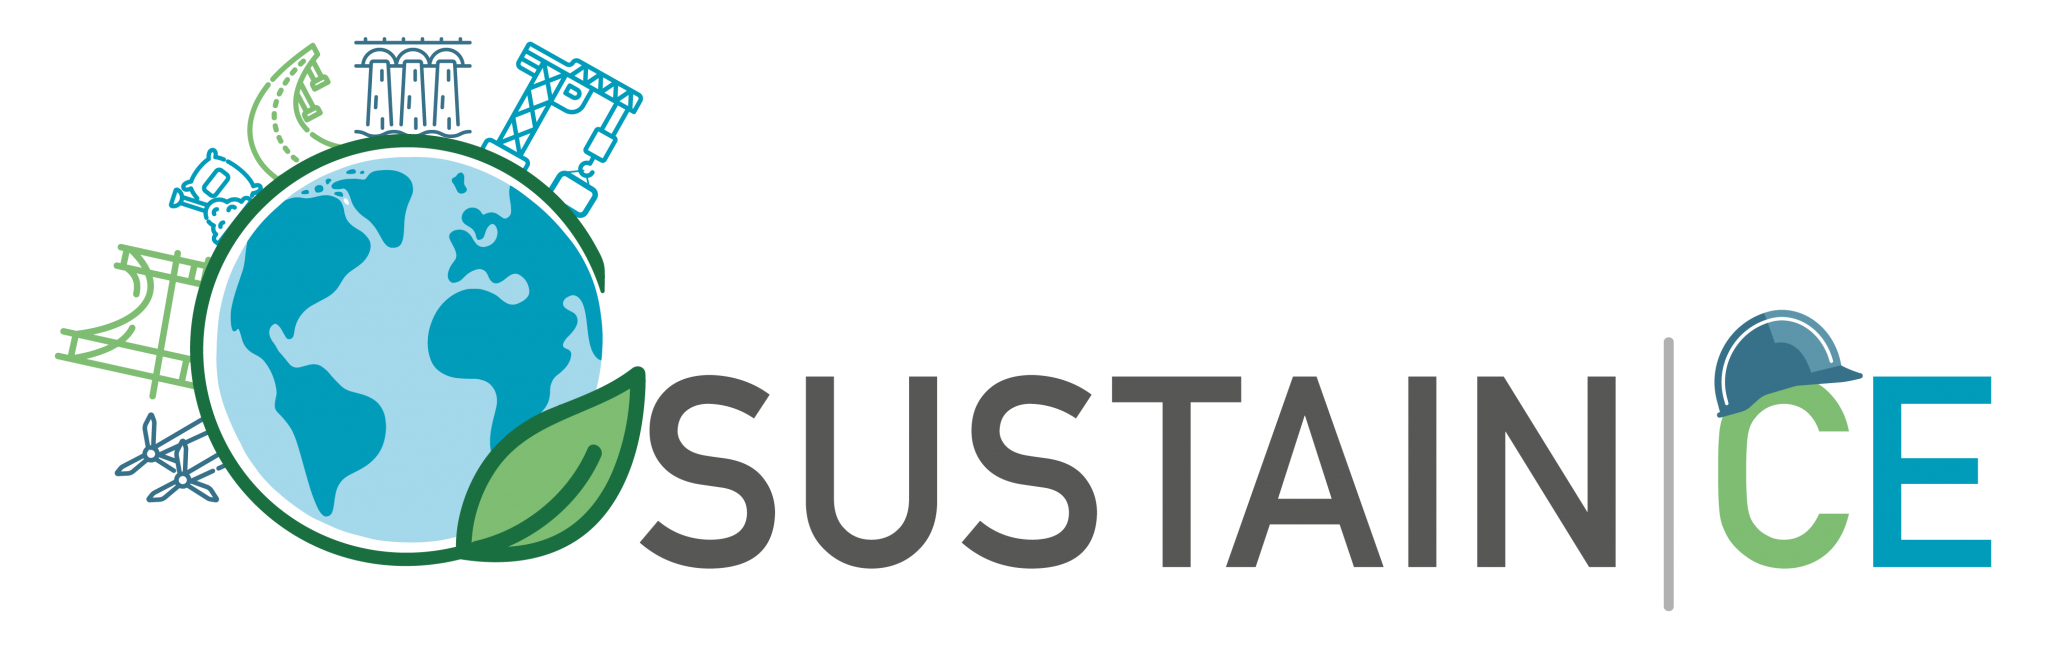 Sustain-CE project: Newsletter #4